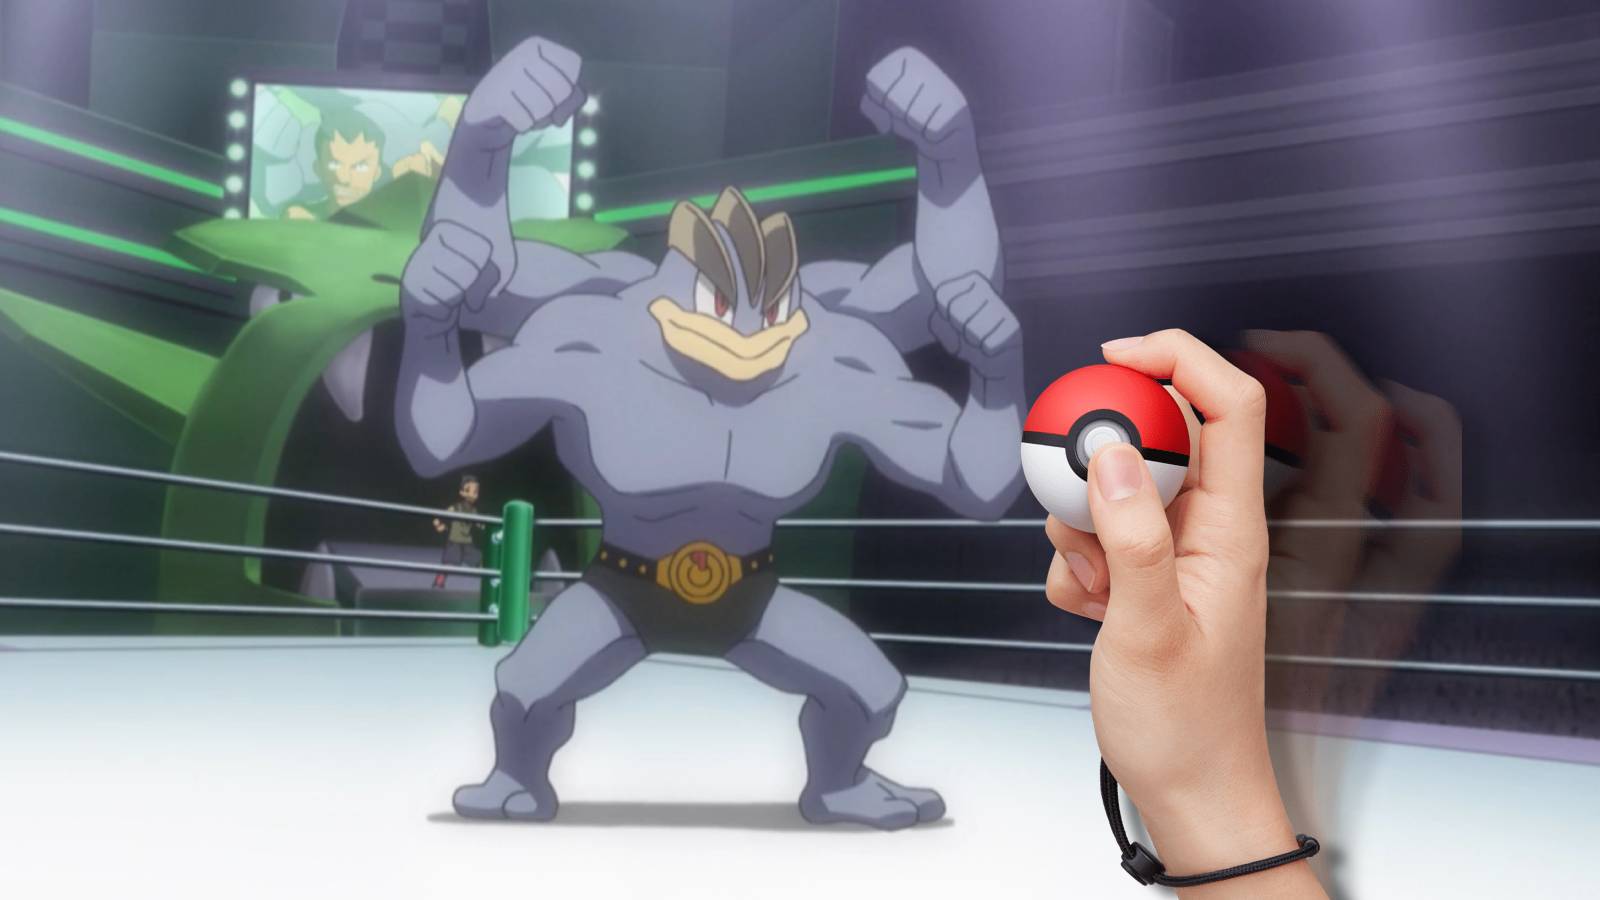 A Machamp stands in a boxing ring, while a hand appears to throw a Poke ball at it